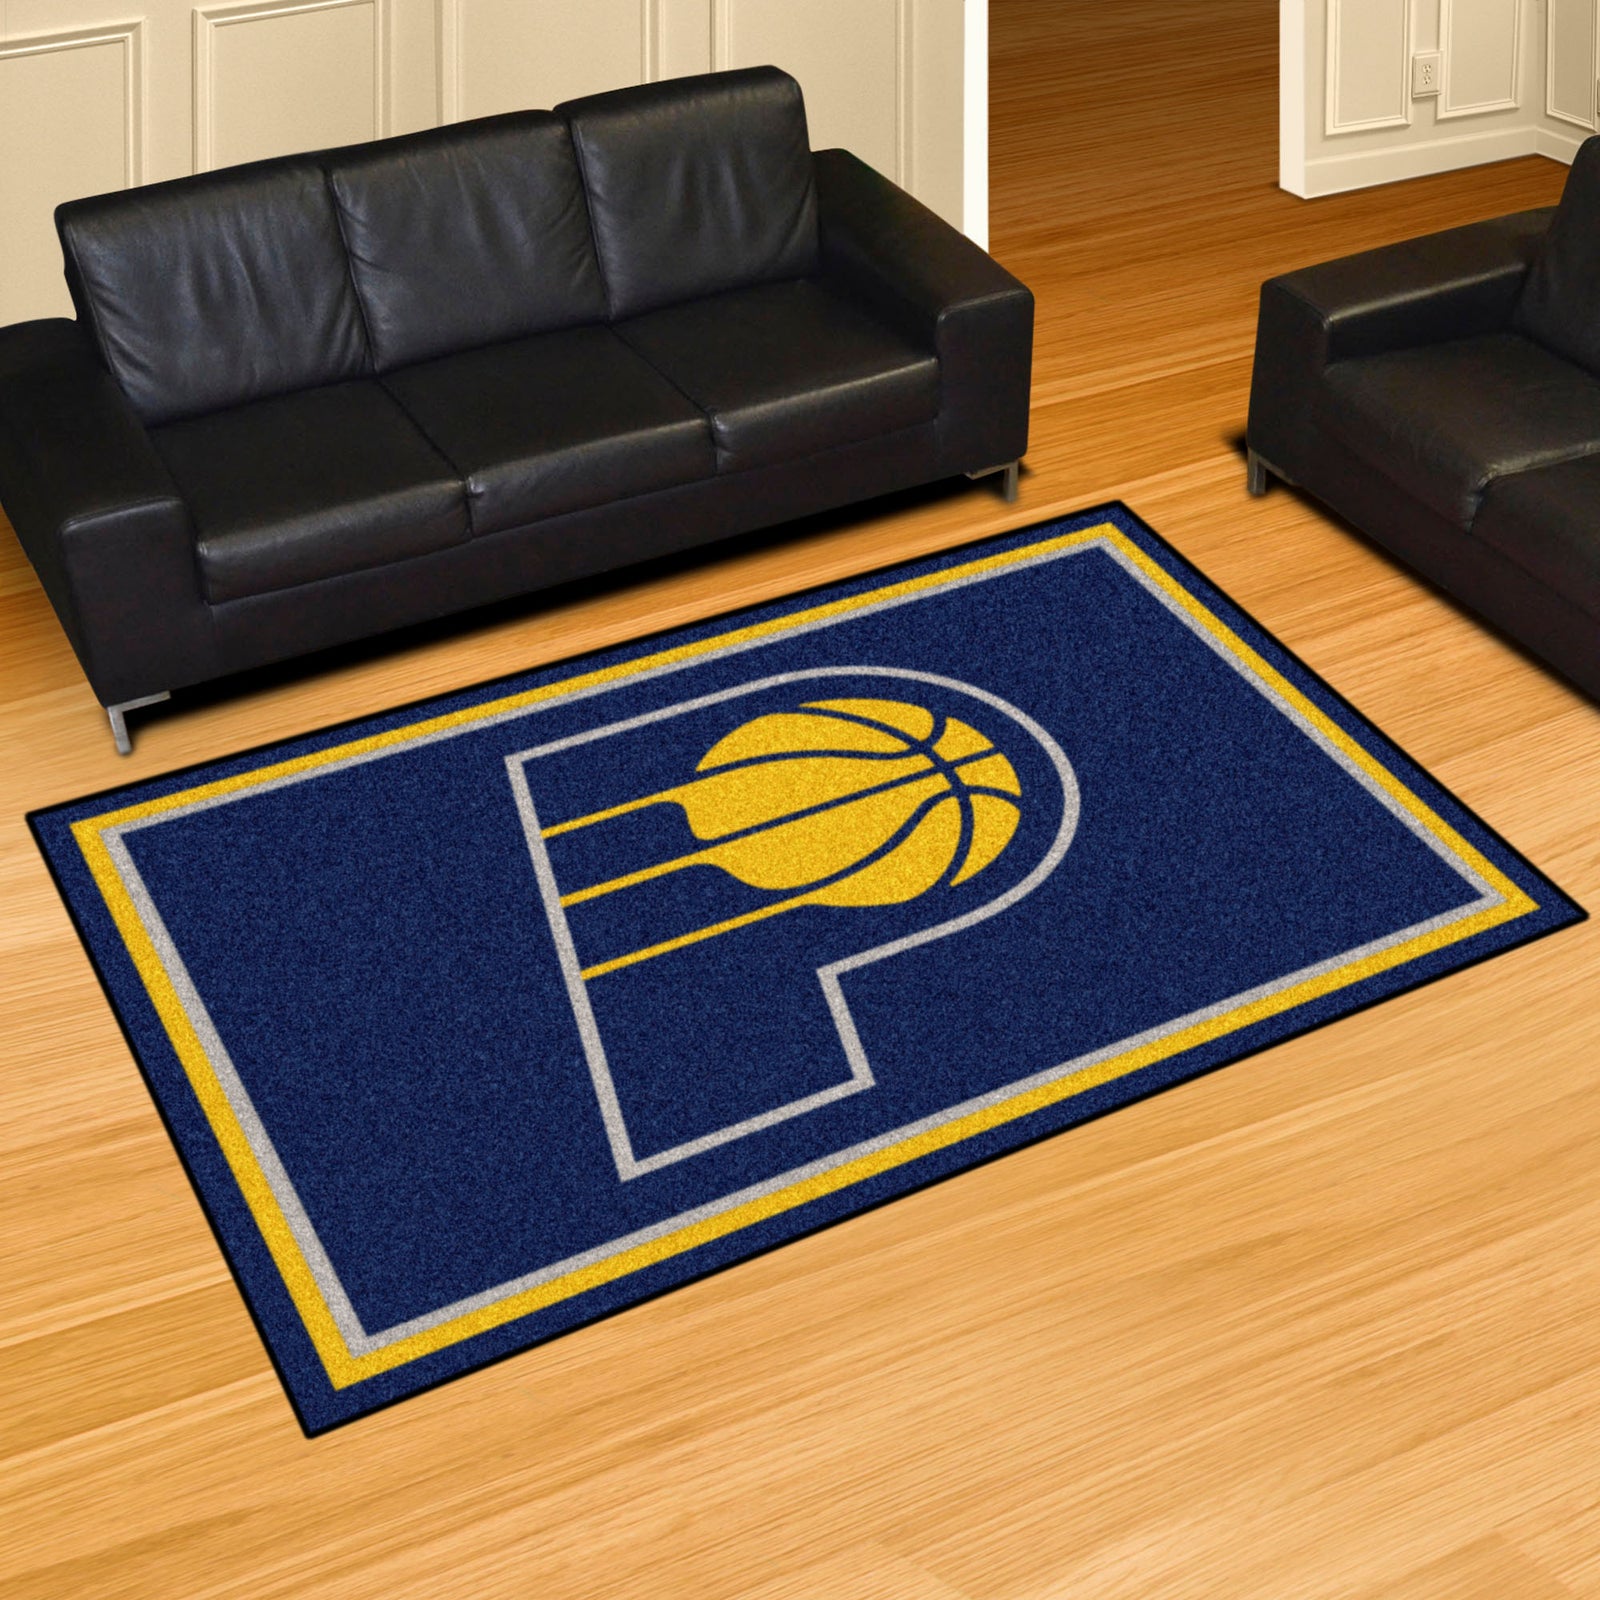 Officially Licensed NBA Carpet Car Mat Set - Indiana Pacers